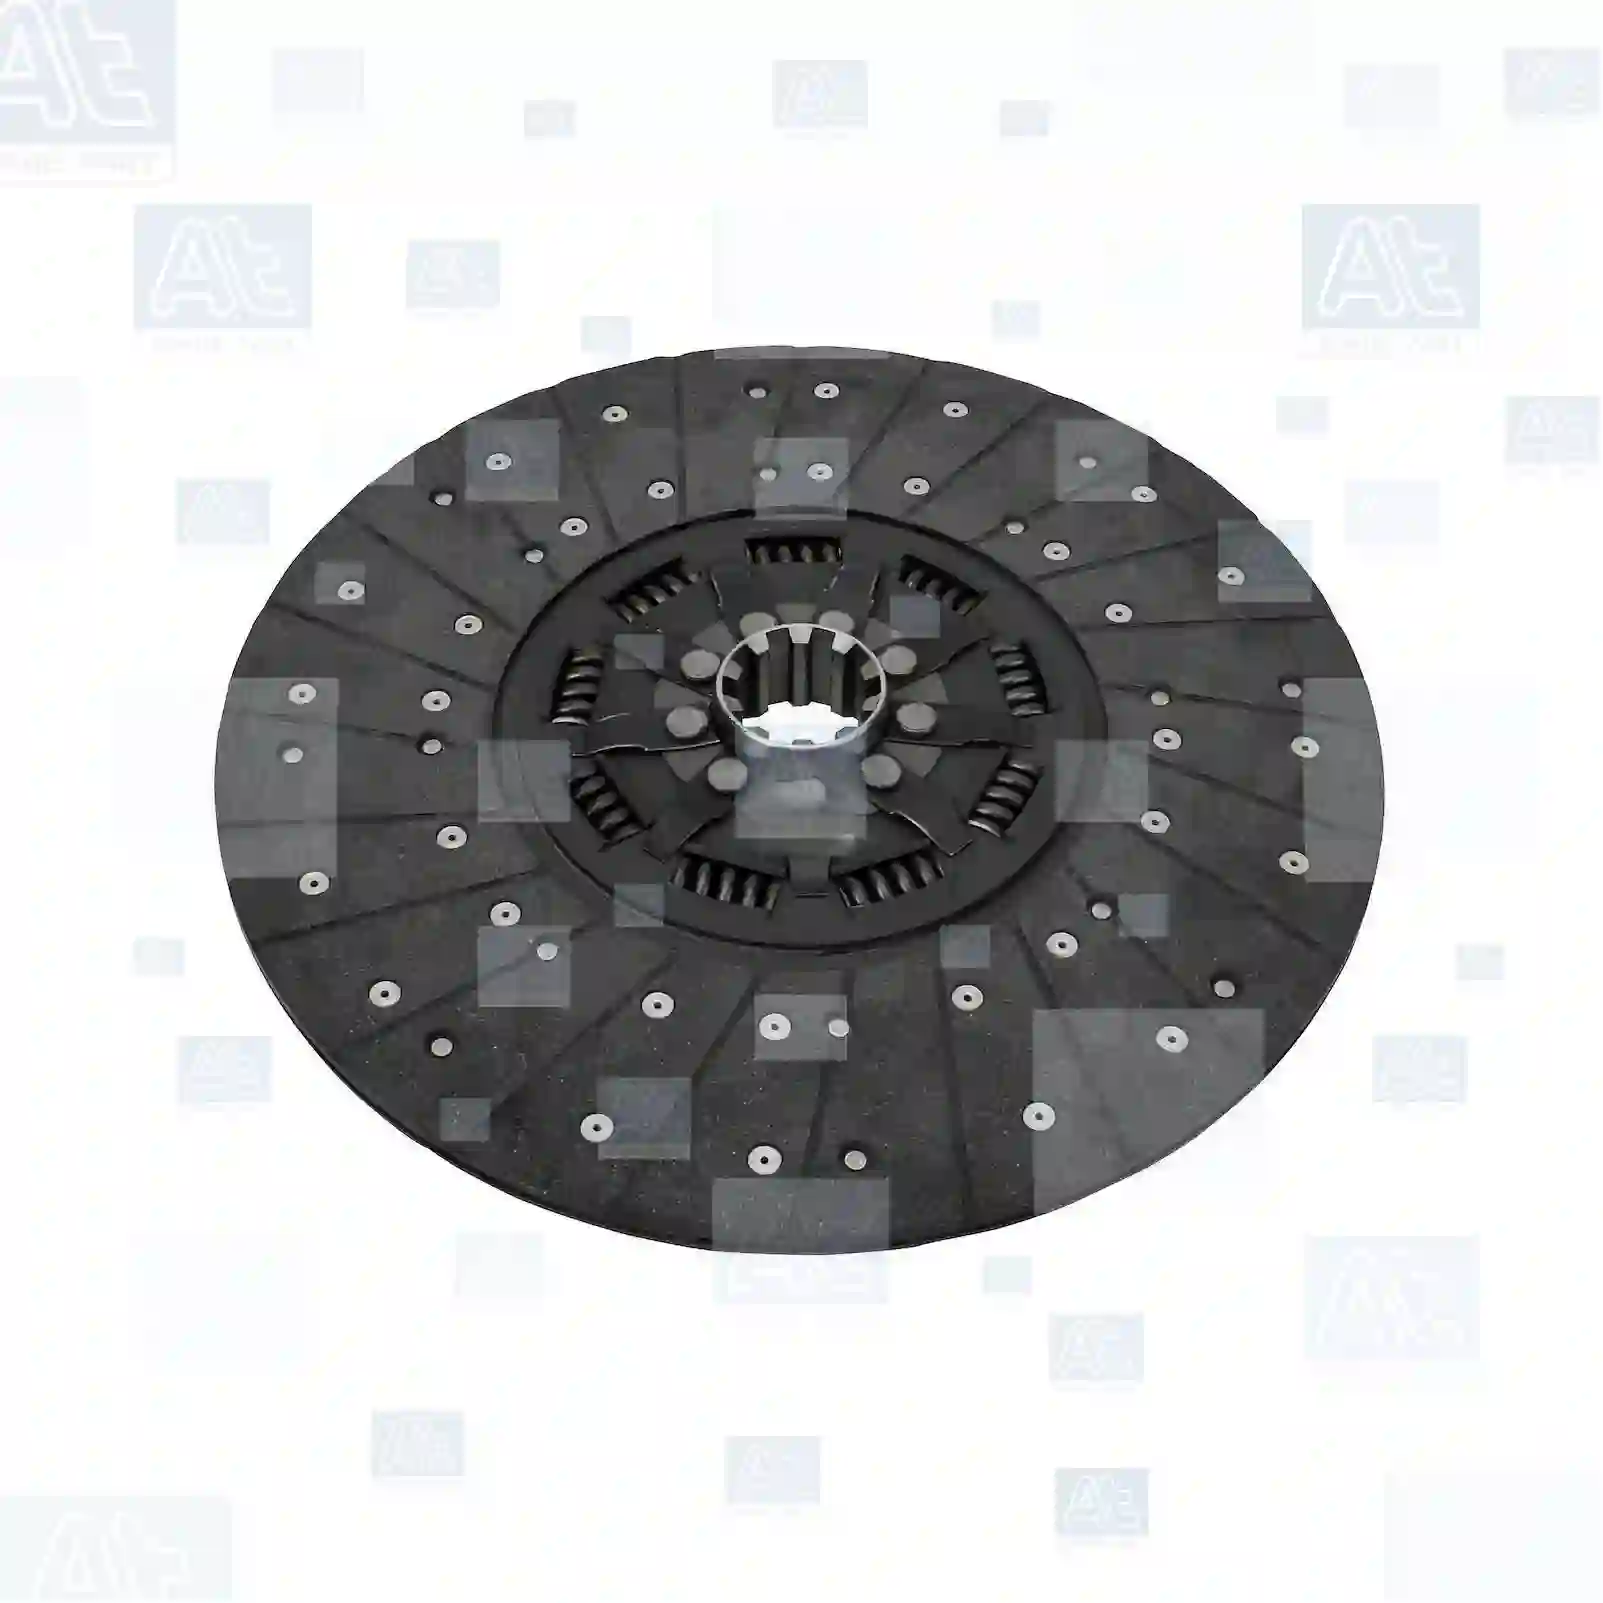 Clutch disc, 77721910, 29519740, 00025020100100, 0890633, 8406404, 81303010235, 81303010314, 81303019235, 81303019314, 82303010039, 0042509603, 0052509303, 0082507903, 0082508003, 008250800380, 0082508103, 0102507403, 8383225000, 8383262000, 042130600, 82303010039, 8383225000, 8383225000D, 8383262000, 99114160007, 99114160032, 99114160913, 632100380, 632101220 ||  77721910 At Spare Part | Engine, Accelerator Pedal, Camshaft, Connecting Rod, Crankcase, Crankshaft, Cylinder Head, Engine Suspension Mountings, Exhaust Manifold, Exhaust Gas Recirculation, Filter Kits, Flywheel Housing, General Overhaul Kits, Engine, Intake Manifold, Oil Cleaner, Oil Cooler, Oil Filter, Oil Pump, Oil Sump, Piston & Liner, Sensor & Switch, Timing Case, Turbocharger, Cooling System, Belt Tensioner, Coolant Filter, Coolant Pipe, Corrosion Prevention Agent, Drive, Expansion Tank, Fan, Intercooler, Monitors & Gauges, Radiator, Thermostat, V-Belt / Timing belt, Water Pump, Fuel System, Electronical Injector Unit, Feed Pump, Fuel Filter, cpl., Fuel Gauge Sender,  Fuel Line, Fuel Pump, Fuel Tank, Injection Line Kit, Injection Pump, Exhaust System, Clutch & Pedal, Gearbox, Propeller Shaft, Axles, Brake System, Hubs & Wheels, Suspension, Leaf Spring, Universal Parts / Accessories, Steering, Electrical System, Cabin Clutch disc, 77721910, 29519740, 00025020100100, 0890633, 8406404, 81303010235, 81303010314, 81303019235, 81303019314, 82303010039, 0042509603, 0052509303, 0082507903, 0082508003, 008250800380, 0082508103, 0102507403, 8383225000, 8383262000, 042130600, 82303010039, 8383225000, 8383225000D, 8383262000, 99114160007, 99114160032, 99114160913, 632100380, 632101220 ||  77721910 At Spare Part | Engine, Accelerator Pedal, Camshaft, Connecting Rod, Crankcase, Crankshaft, Cylinder Head, Engine Suspension Mountings, Exhaust Manifold, Exhaust Gas Recirculation, Filter Kits, Flywheel Housing, General Overhaul Kits, Engine, Intake Manifold, Oil Cleaner, Oil Cooler, Oil Filter, Oil Pump, Oil Sump, Piston & Liner, Sensor & Switch, Timing Case, Turbocharger, Cooling System, Belt Tensioner, Coolant Filter, Coolant Pipe, Corrosion Prevention Agent, Drive, Expansion Tank, Fan, Intercooler, Monitors & Gauges, Radiator, Thermostat, V-Belt / Timing belt, Water Pump, Fuel System, Electronical Injector Unit, Feed Pump, Fuel Filter, cpl., Fuel Gauge Sender,  Fuel Line, Fuel Pump, Fuel Tank, Injection Line Kit, Injection Pump, Exhaust System, Clutch & Pedal, Gearbox, Propeller Shaft, Axles, Brake System, Hubs & Wheels, Suspension, Leaf Spring, Universal Parts / Accessories, Steering, Electrical System, Cabin